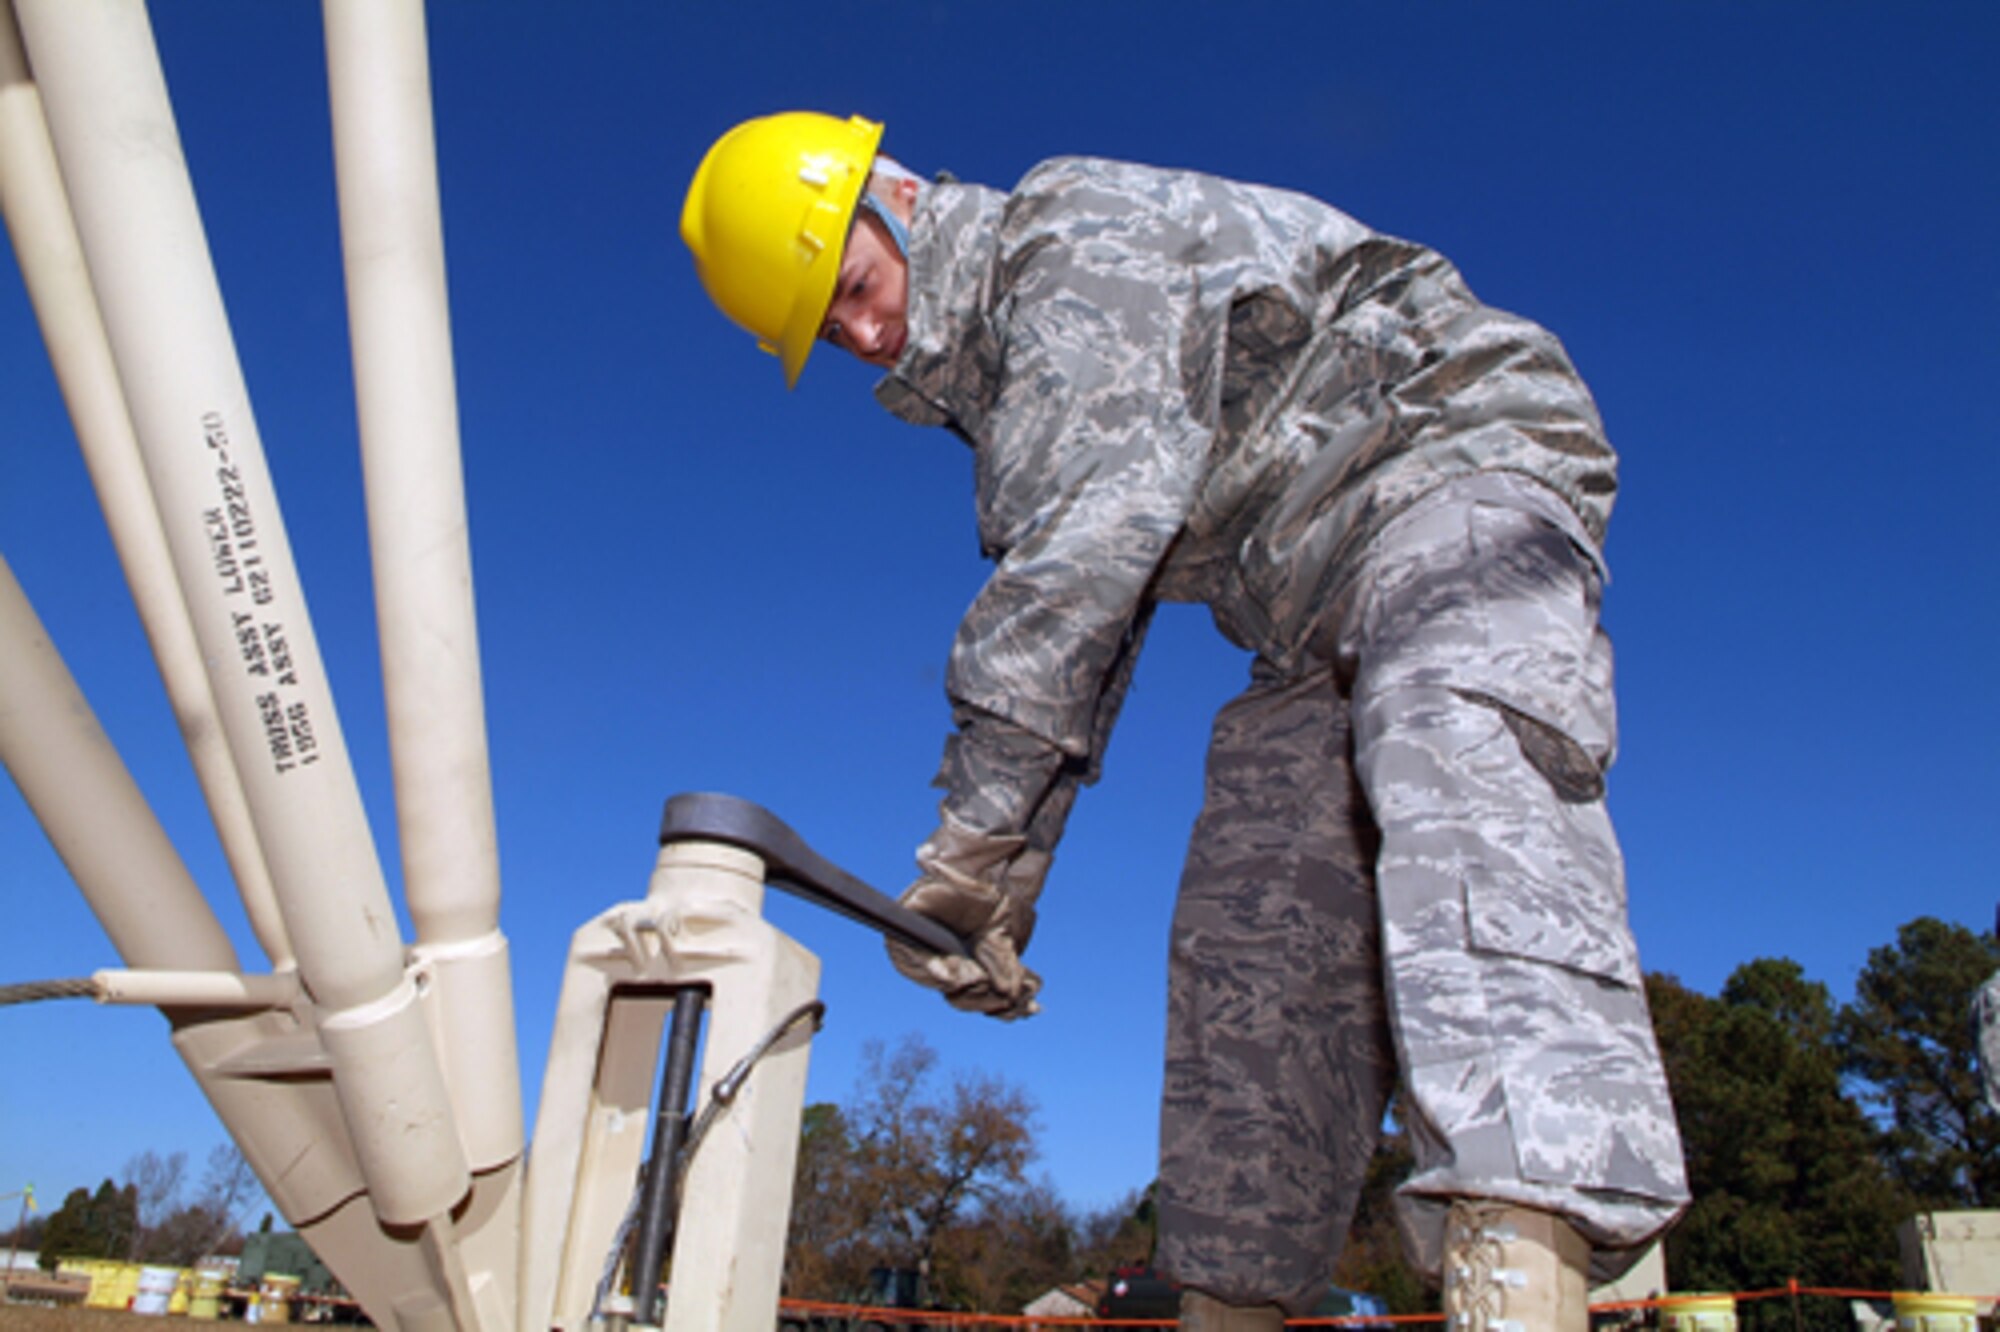 Airman 1st Class David Huntsberger tightens the anchors for the antenna of the  AN/TRC-170, a Tropospheric Scatter Microwave Radio Terminal. U.S. Air Force photos by Tommie Horton